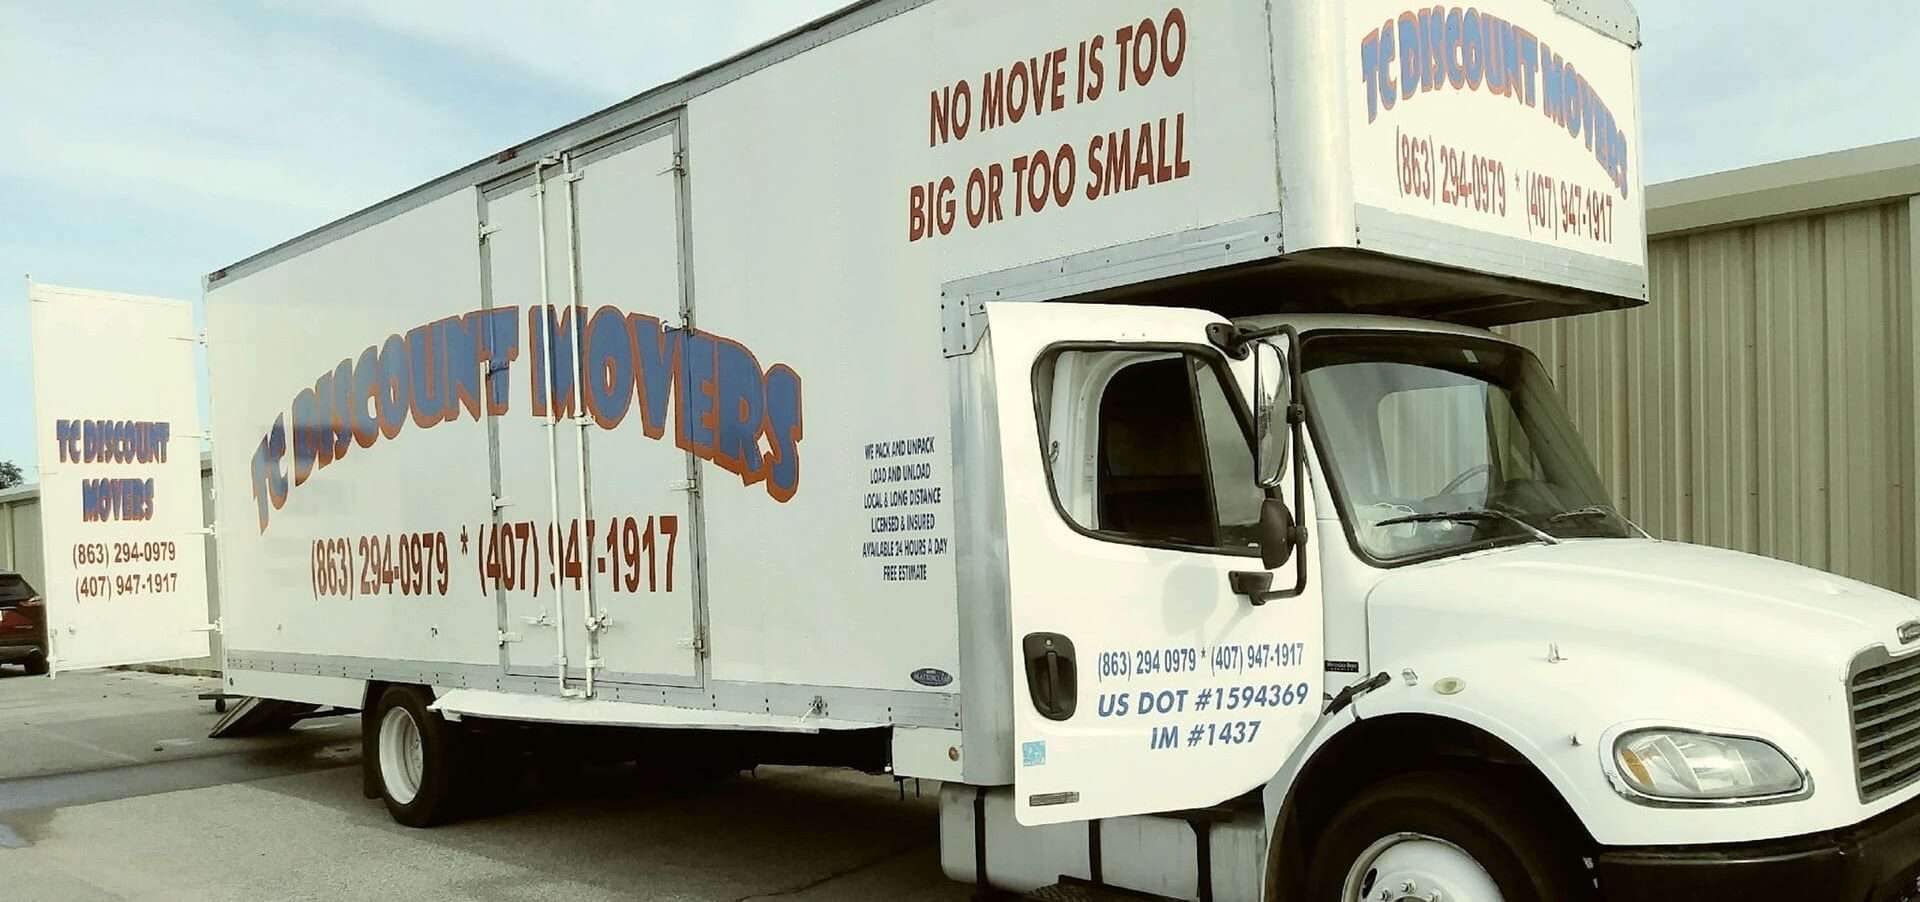 Florida Movers serving the whole state of Florida